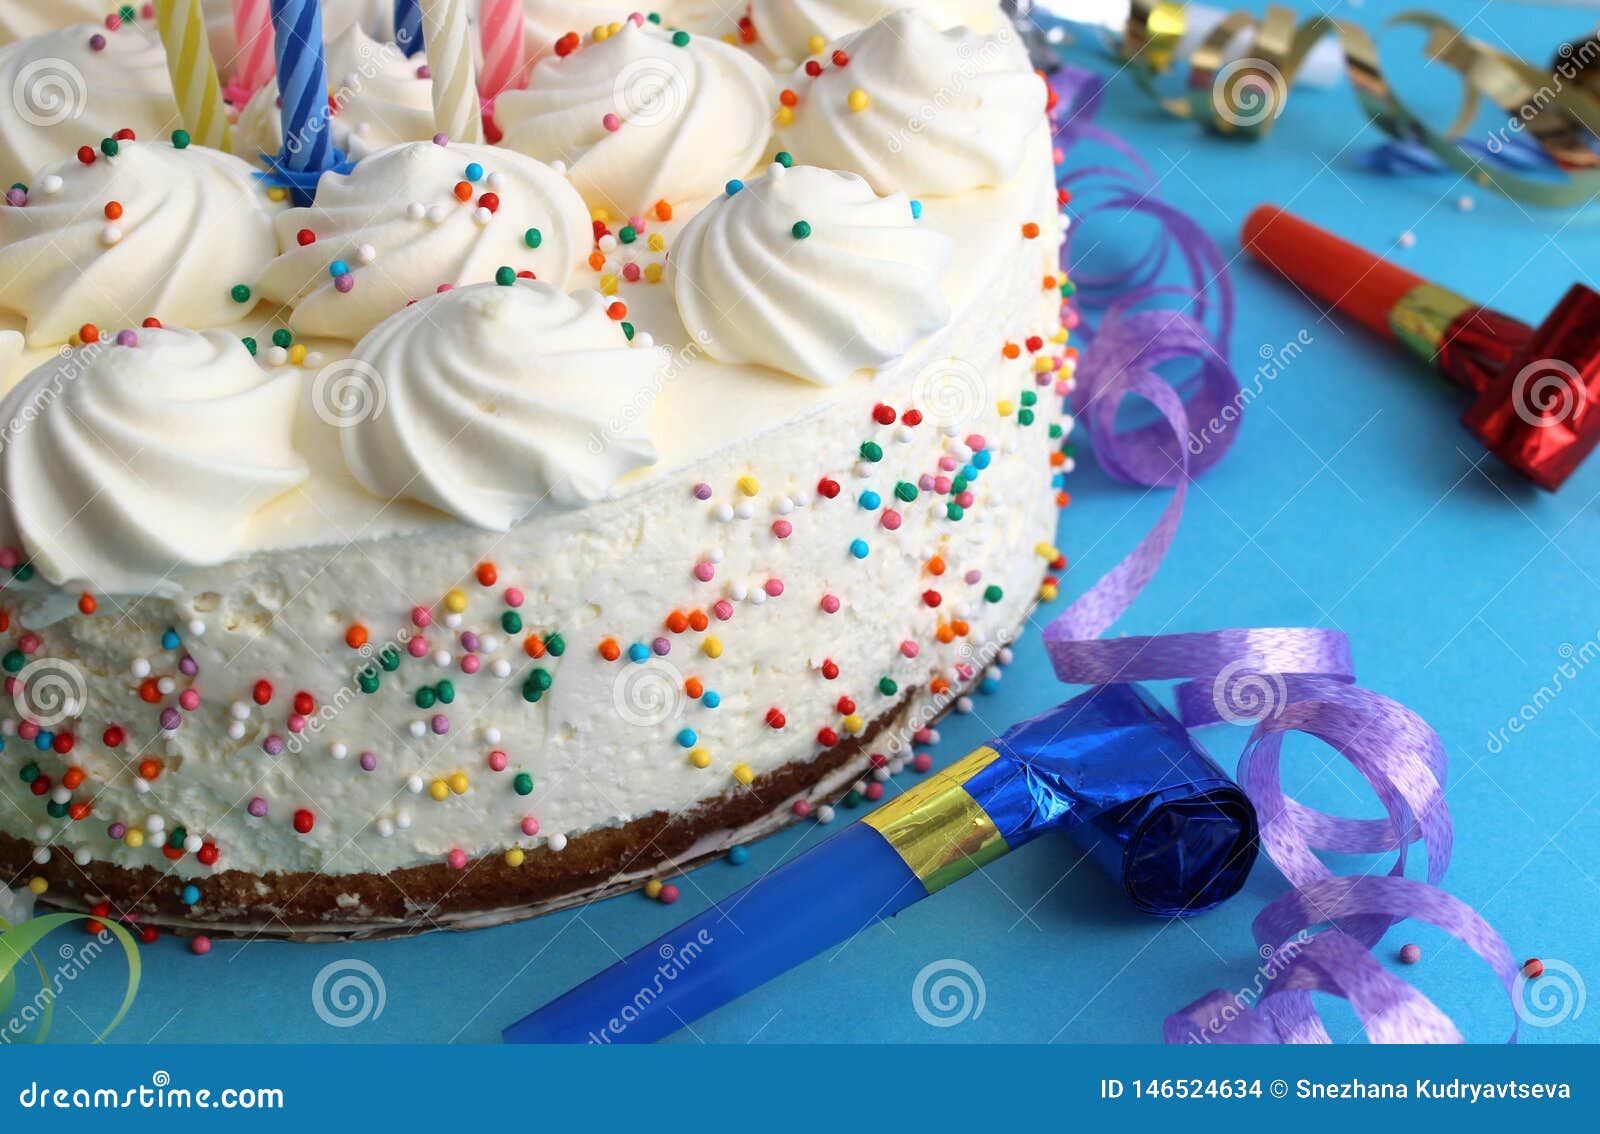 Birthday Cake With Candles For Birthday On A Blue Background With Confetti Stock Photo Image Of Dessert Baked